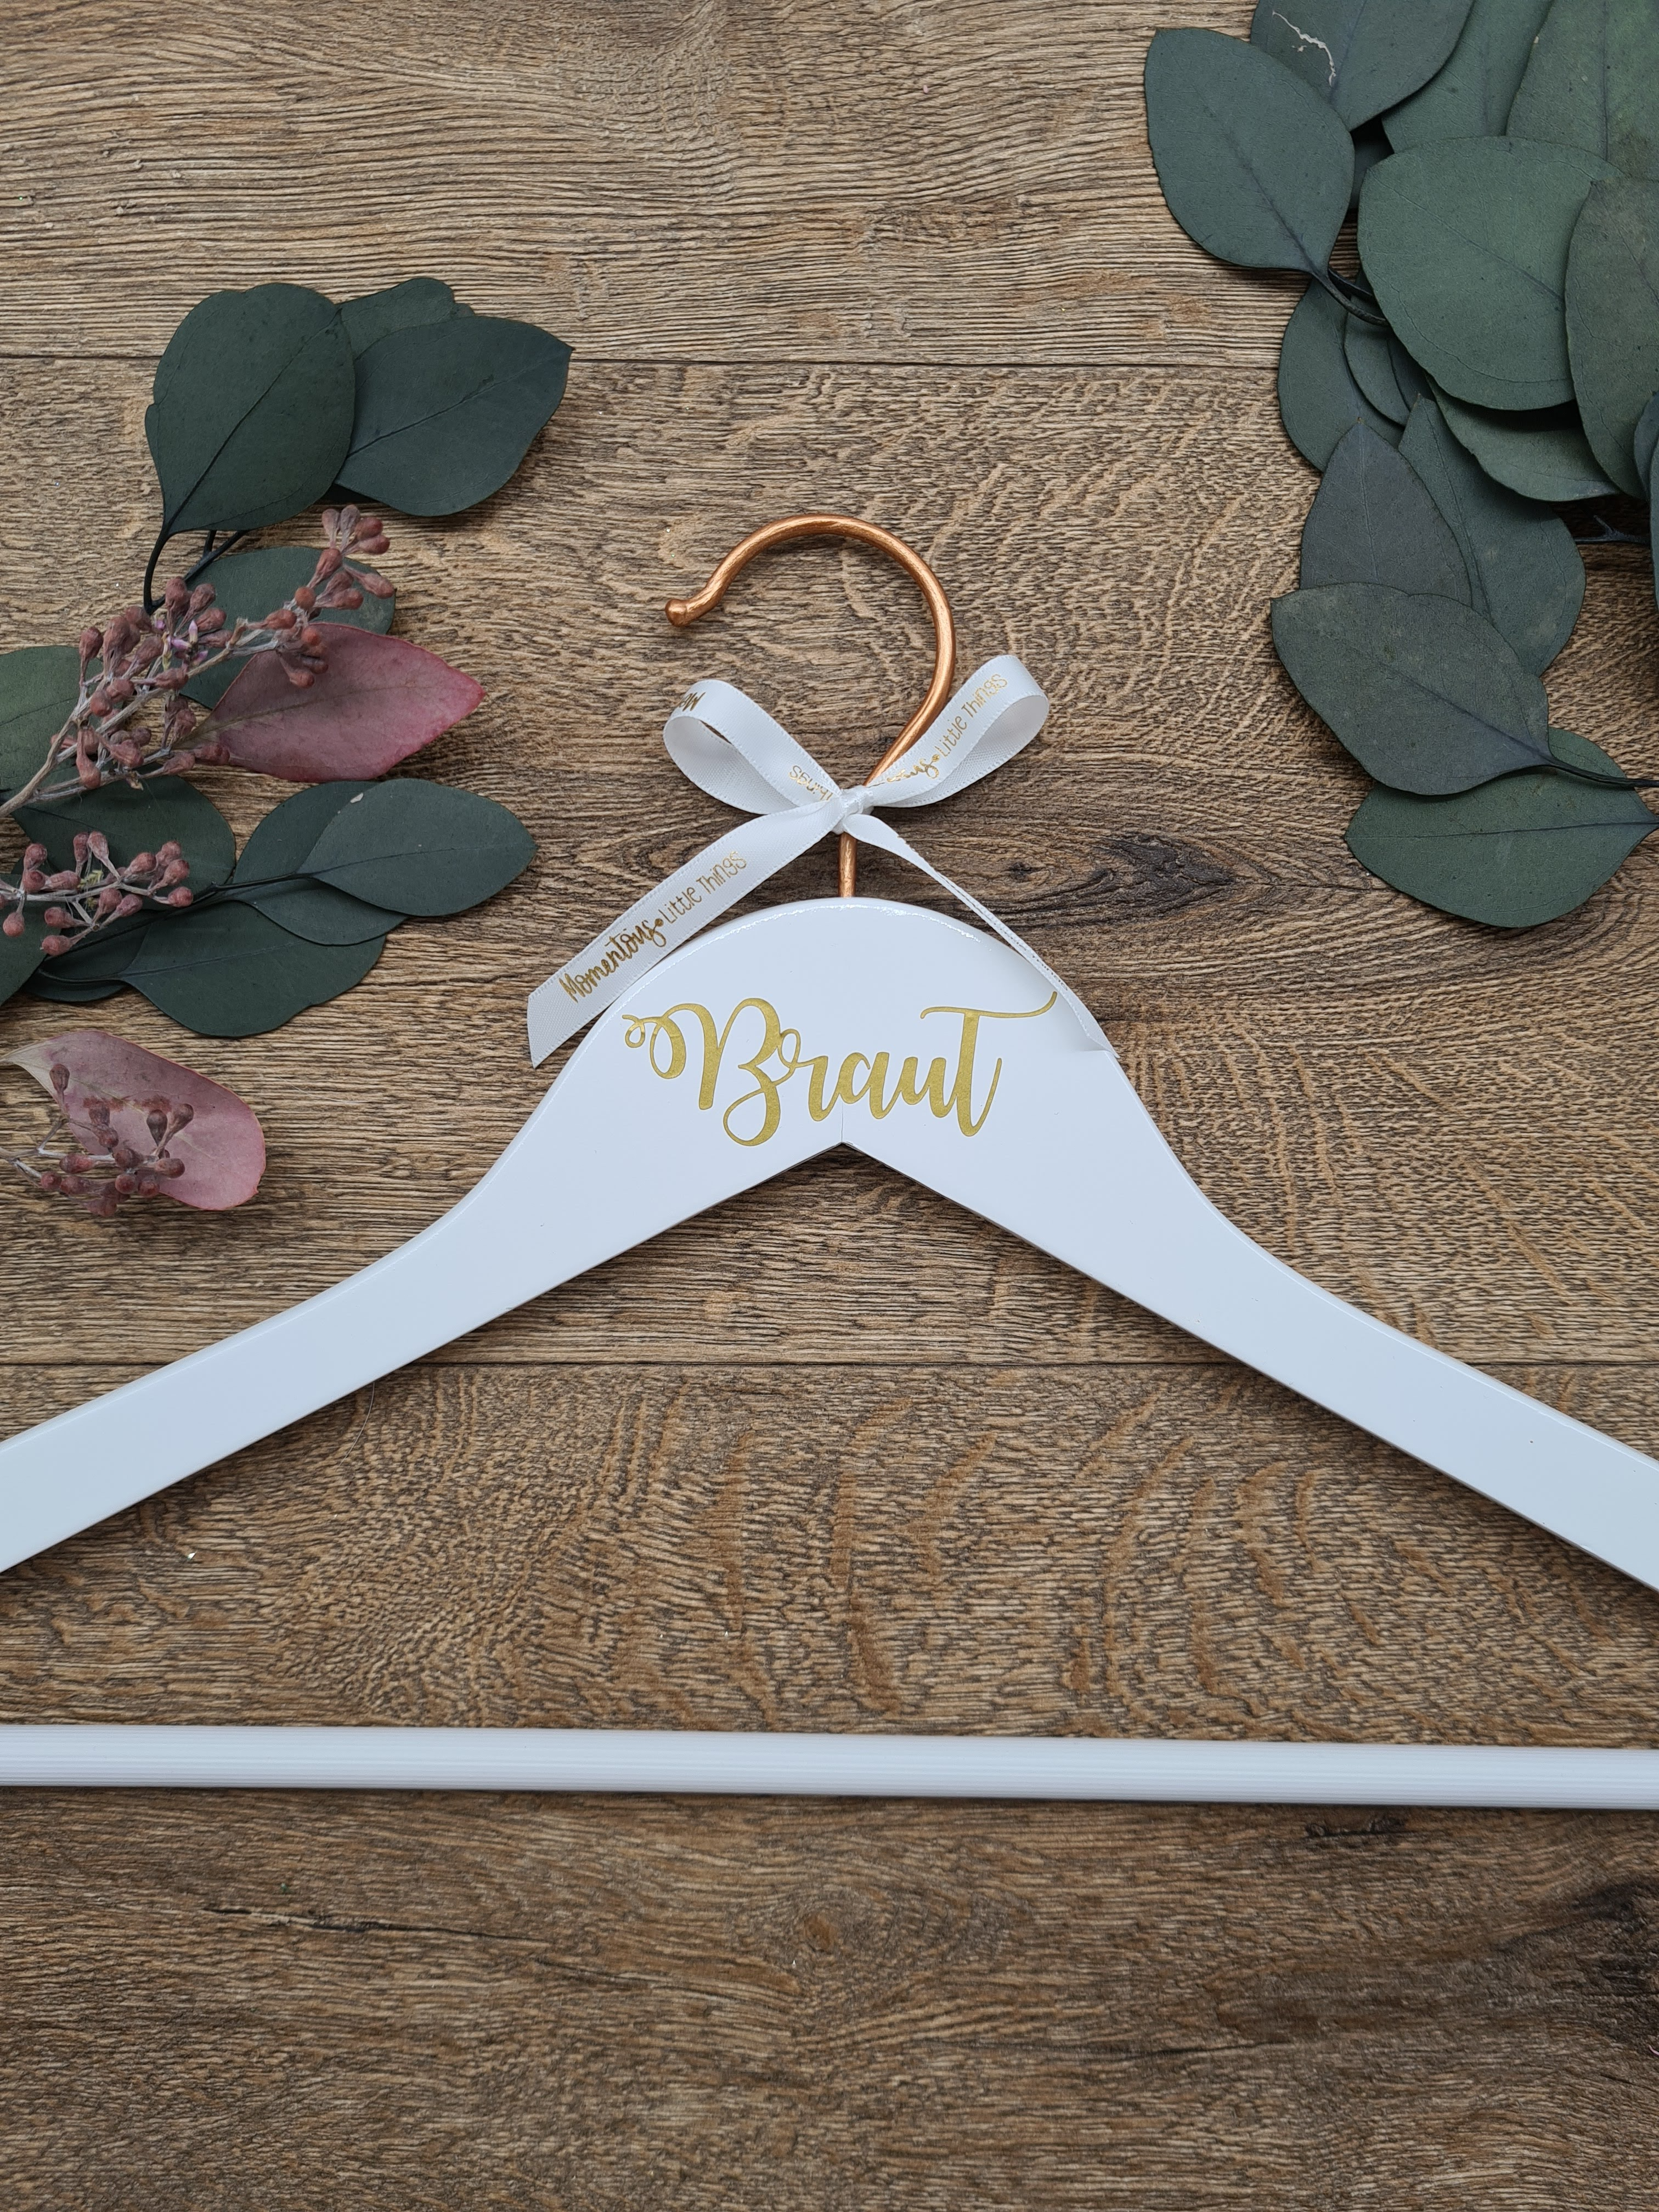 Wedding dress Hanger for Bride with Copper Hook and Gold Text with "Bride"